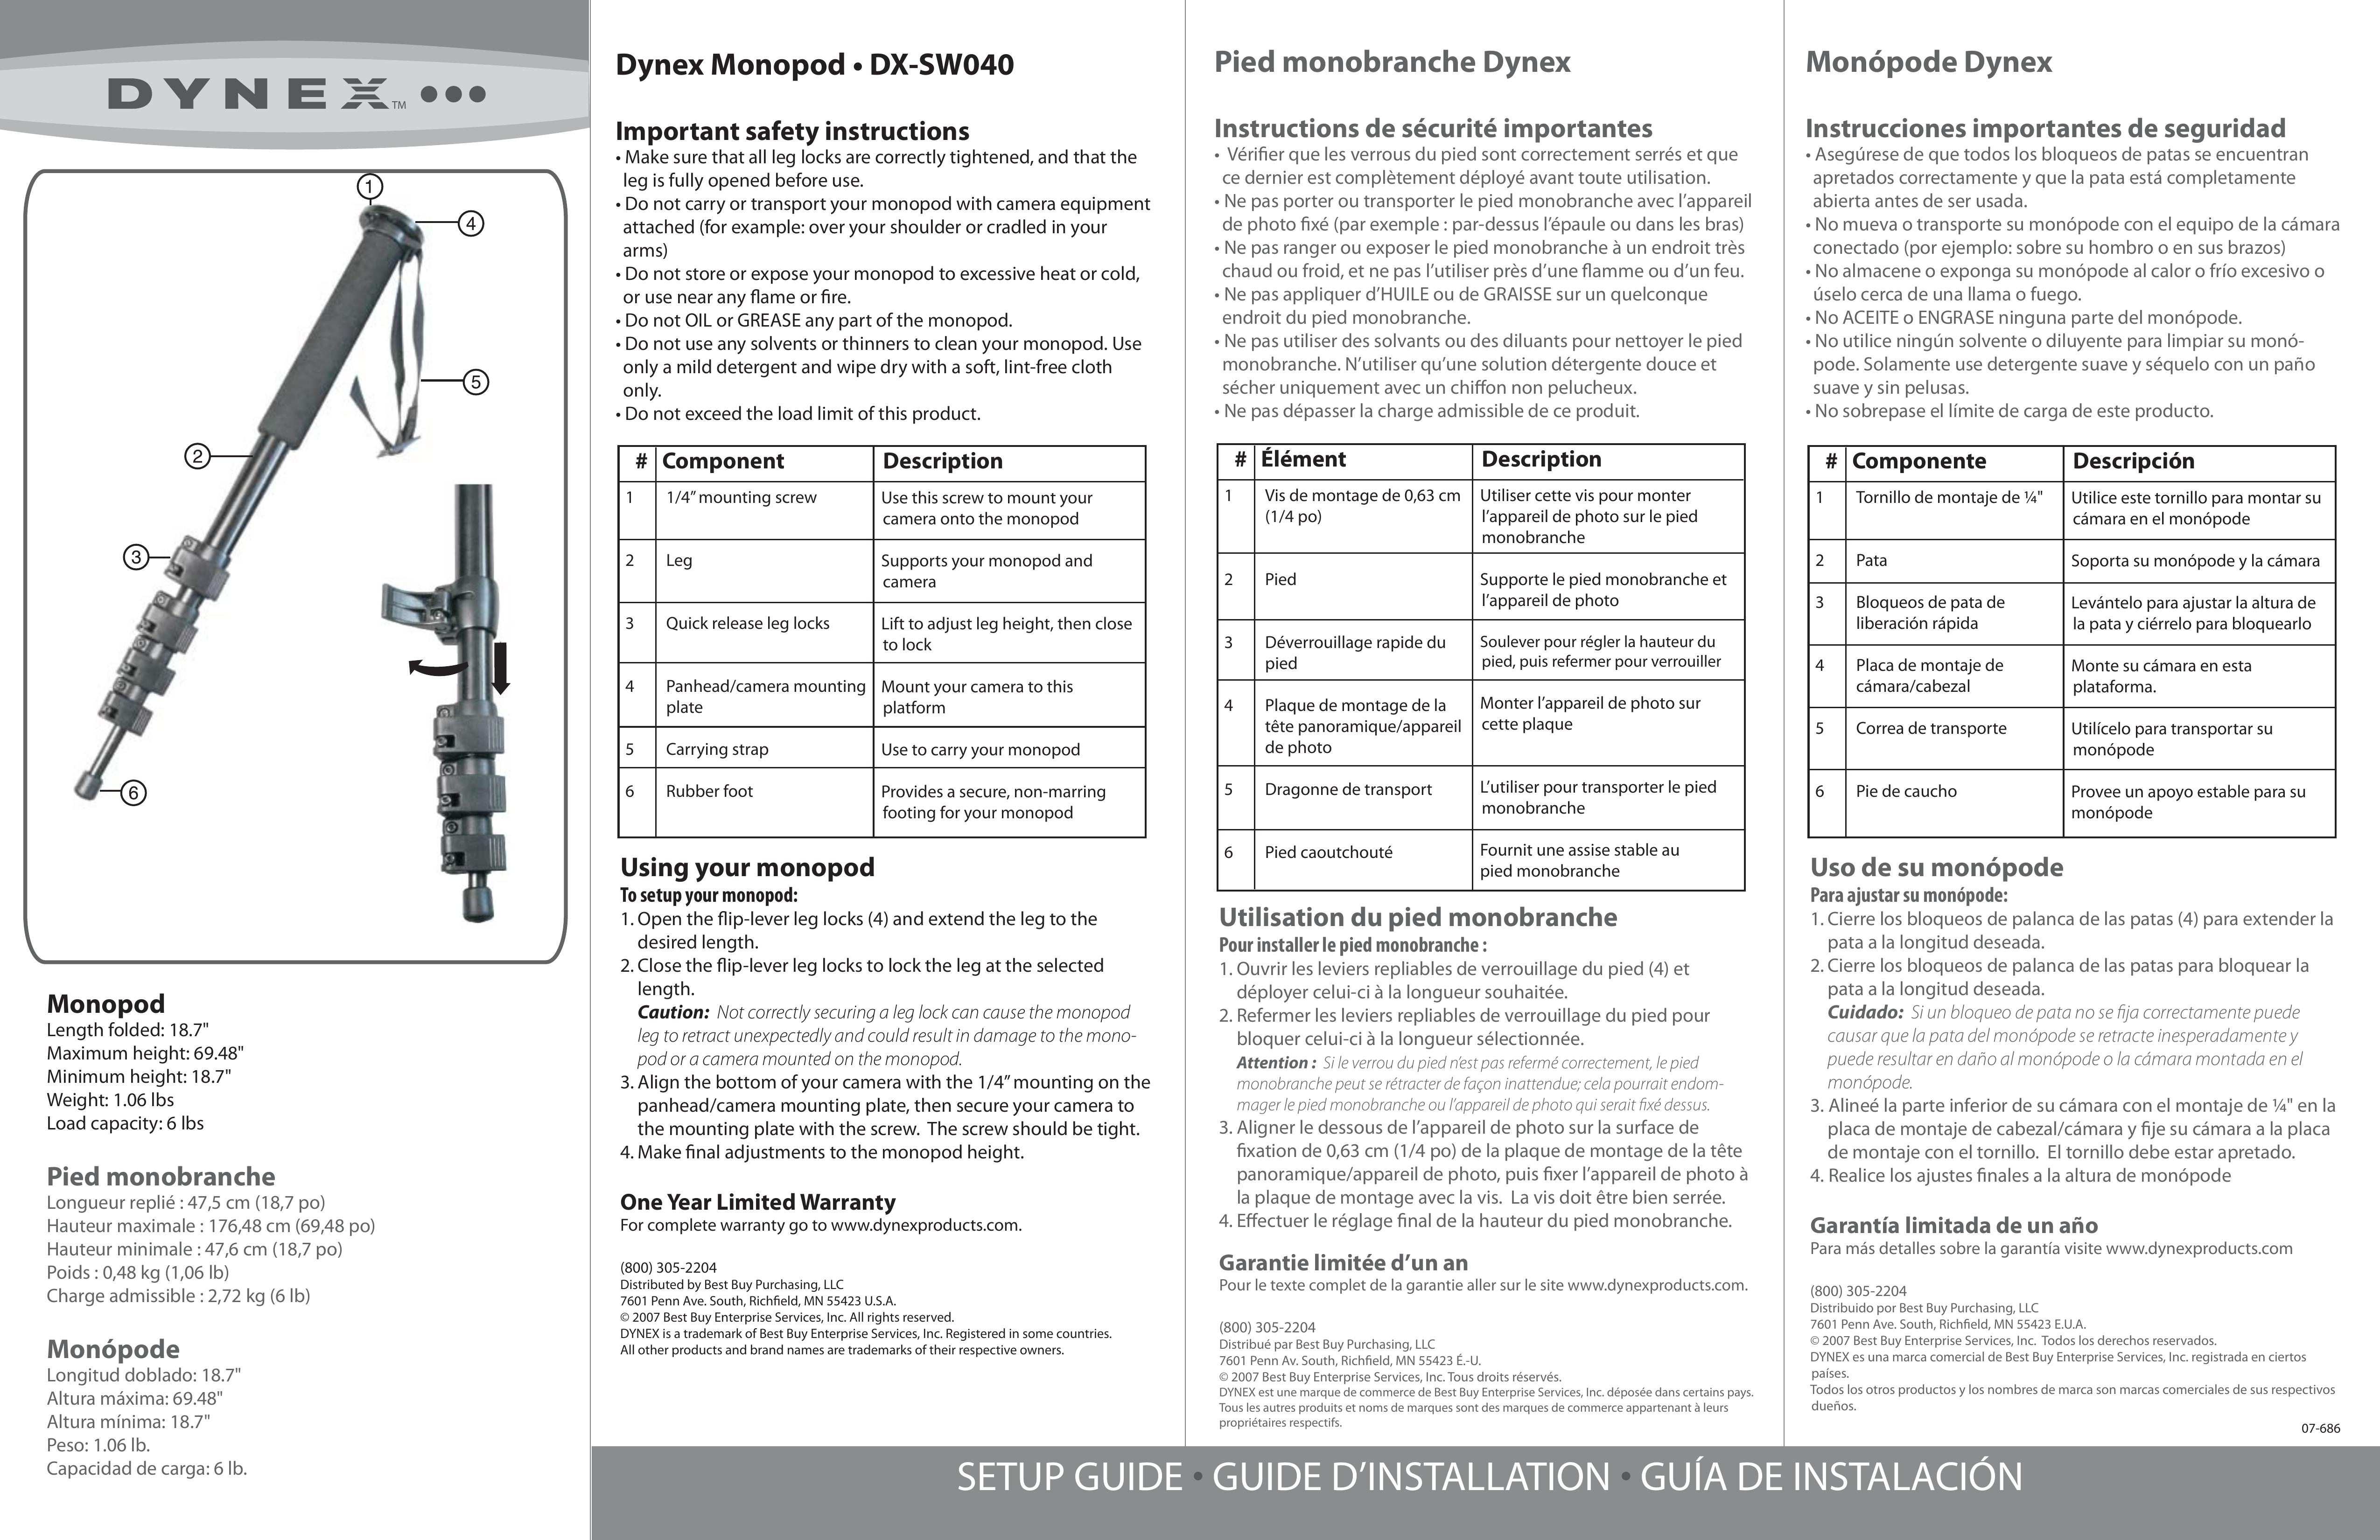 Dynex DX-SW040 Camera Accessories User Manual